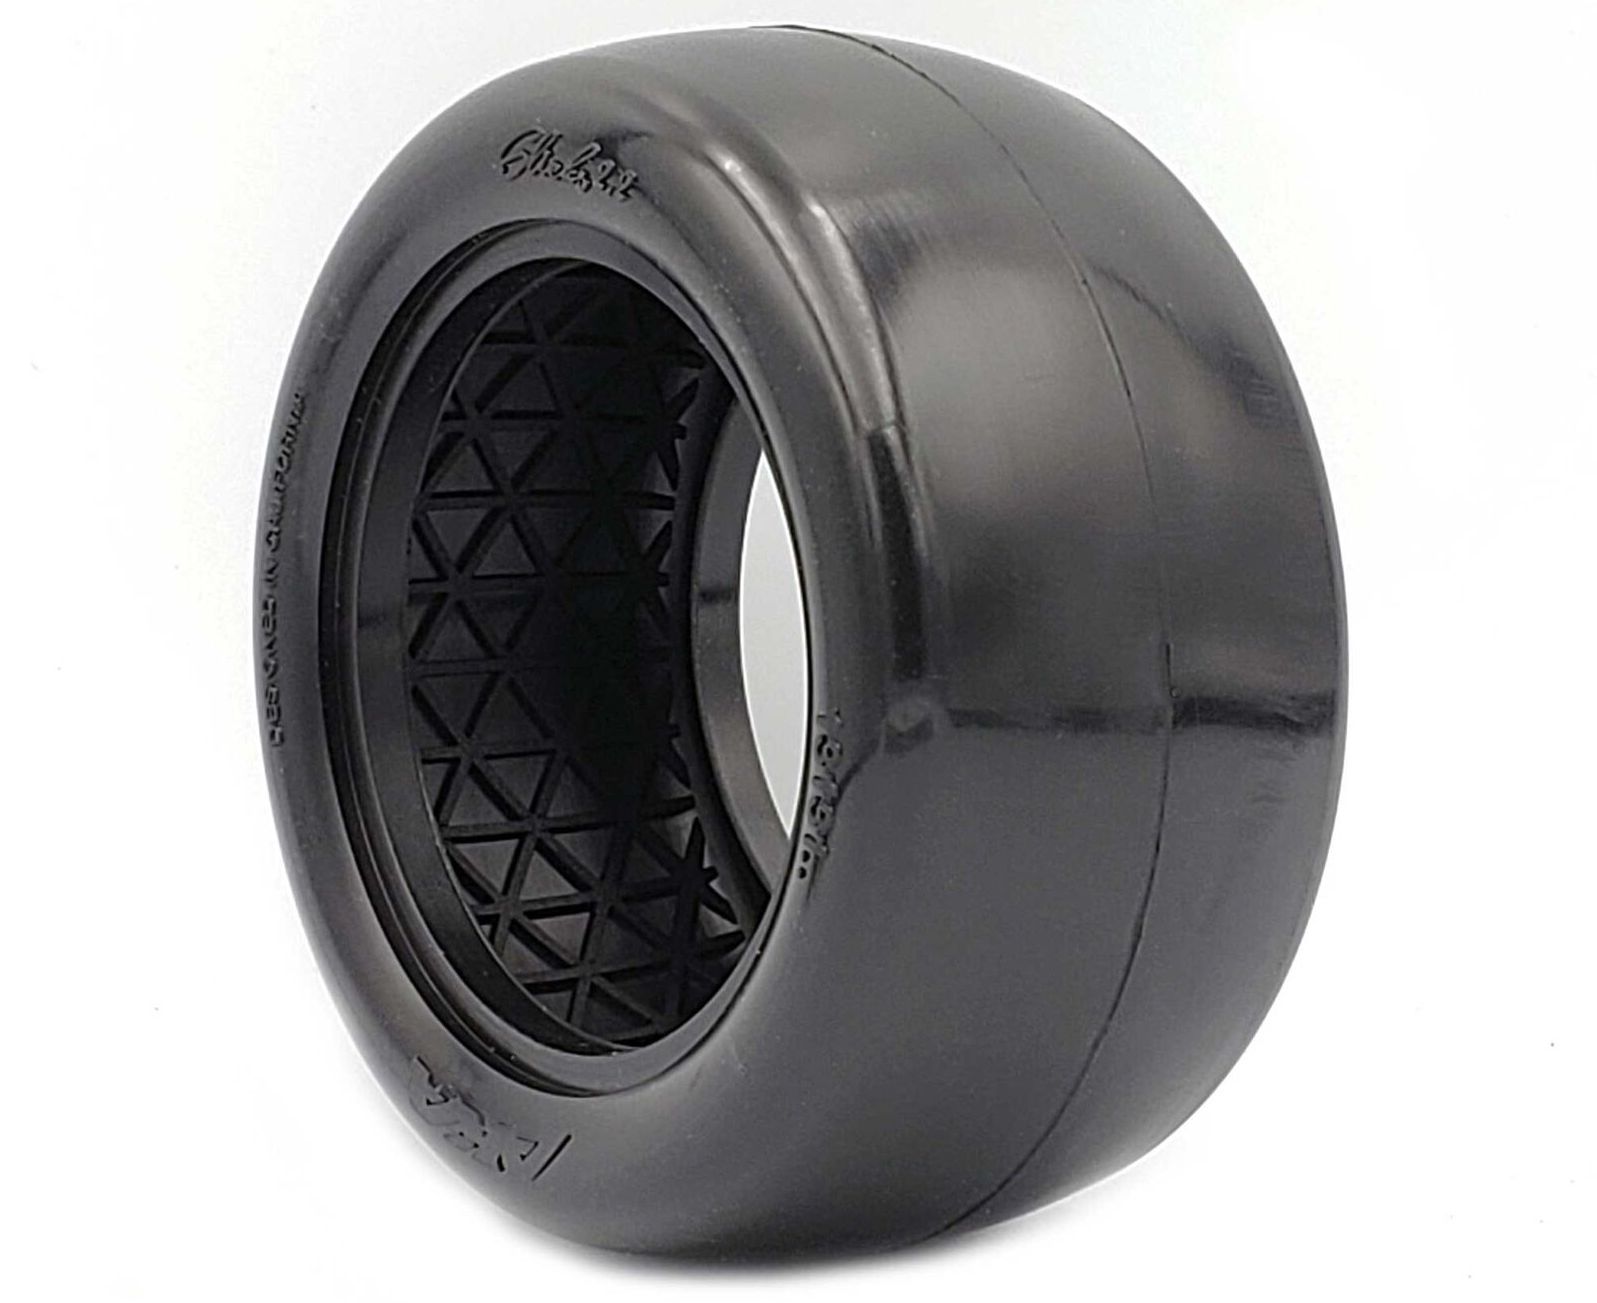 AKA 13131QR - 1/10 Buggy Slick 2.2 Tires with Red Insert, Rear, Super Soft, Long Wear